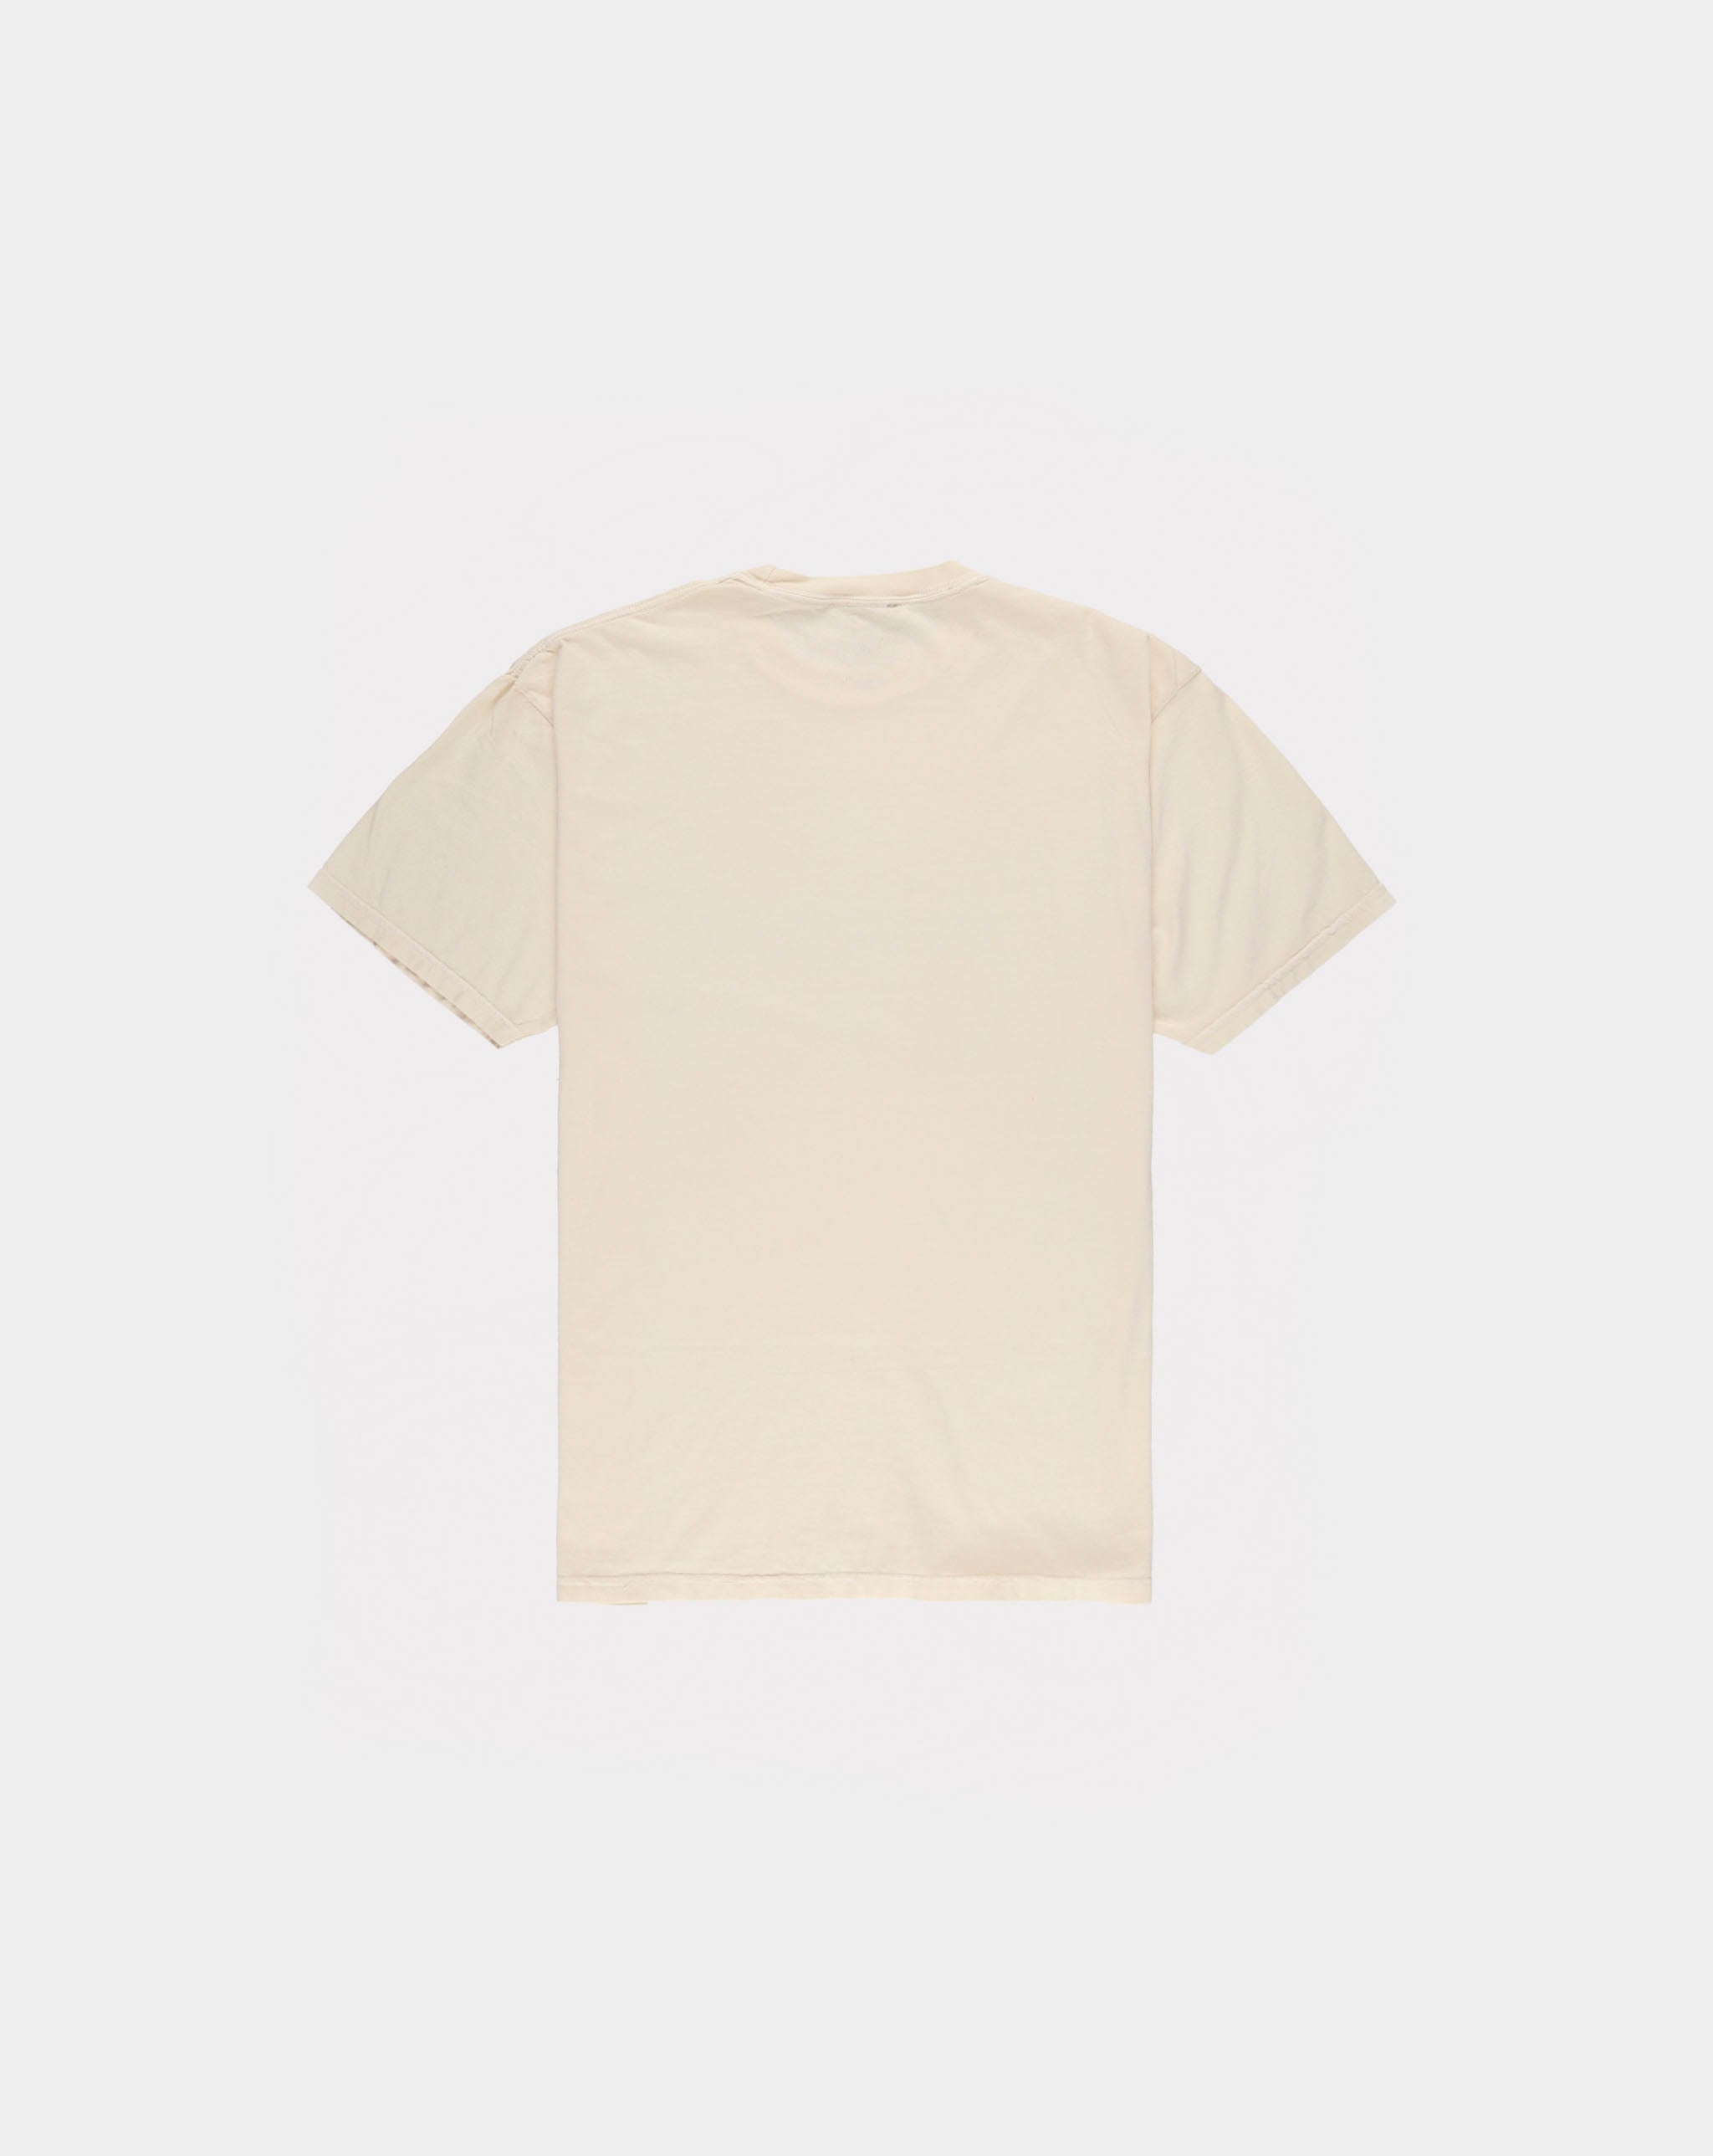 Contrast High CHxX Why Are You Here T-Shirt  - Cheap 127-0 Jordan outlet